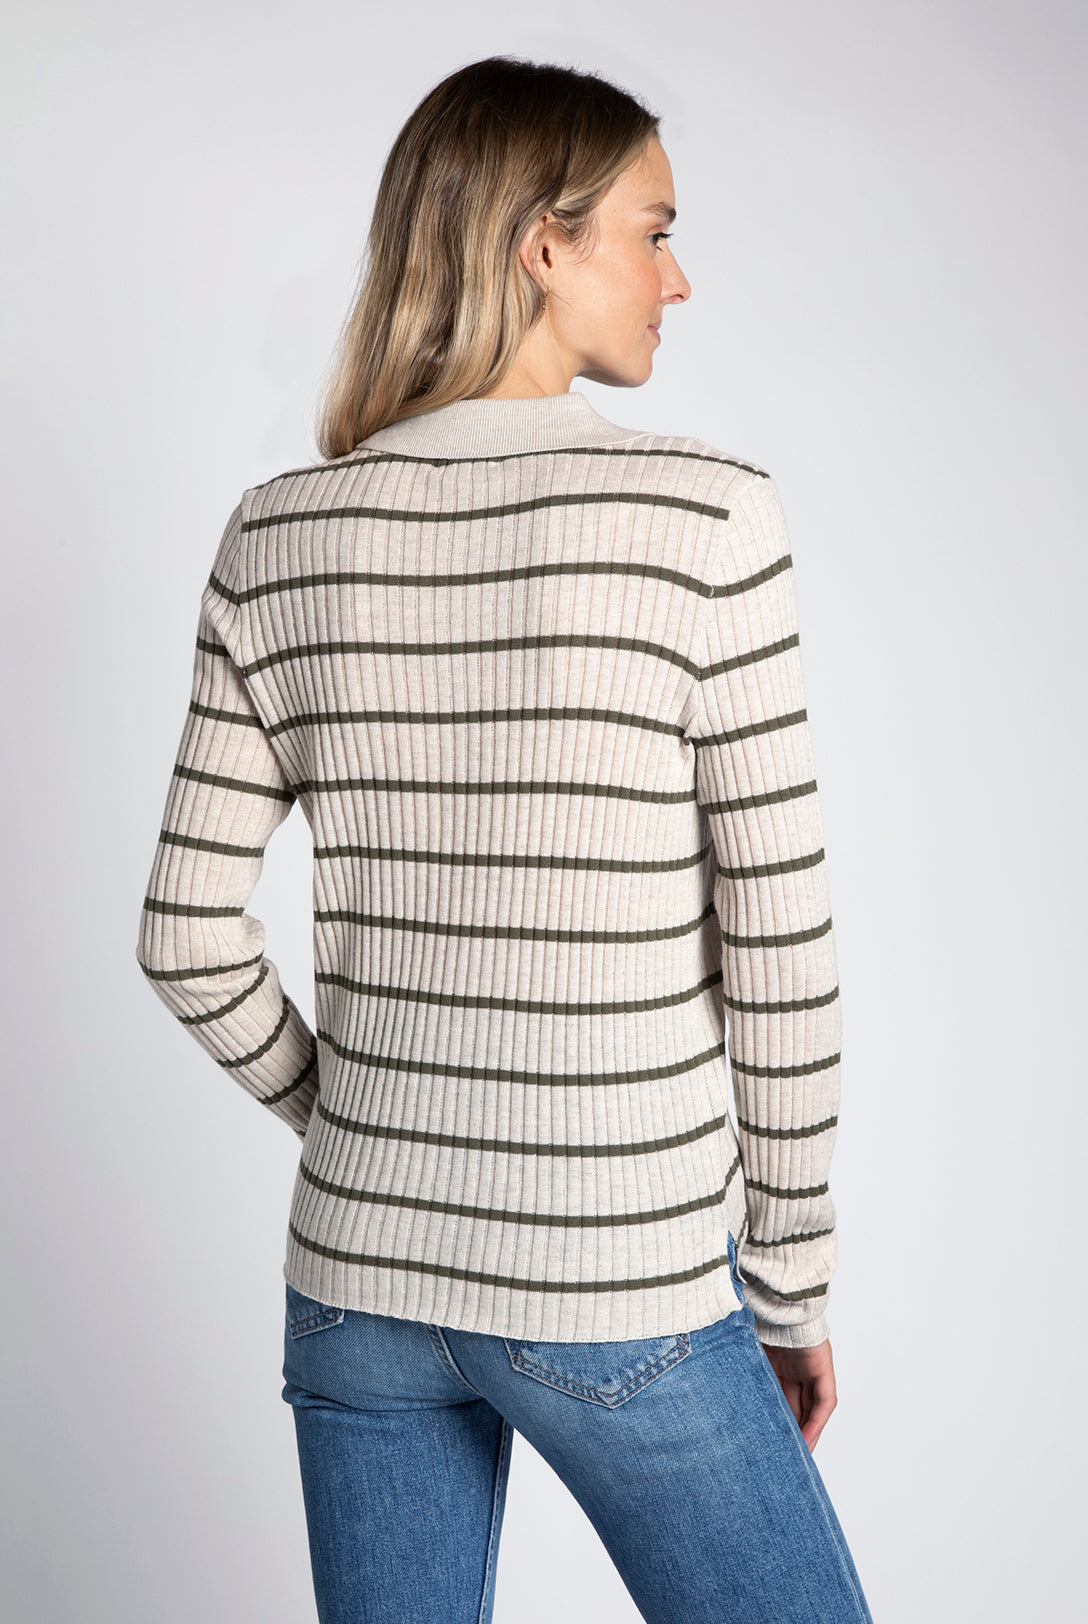 Ivory/Olive Long Sleeve Top Apex Ethical Boutique